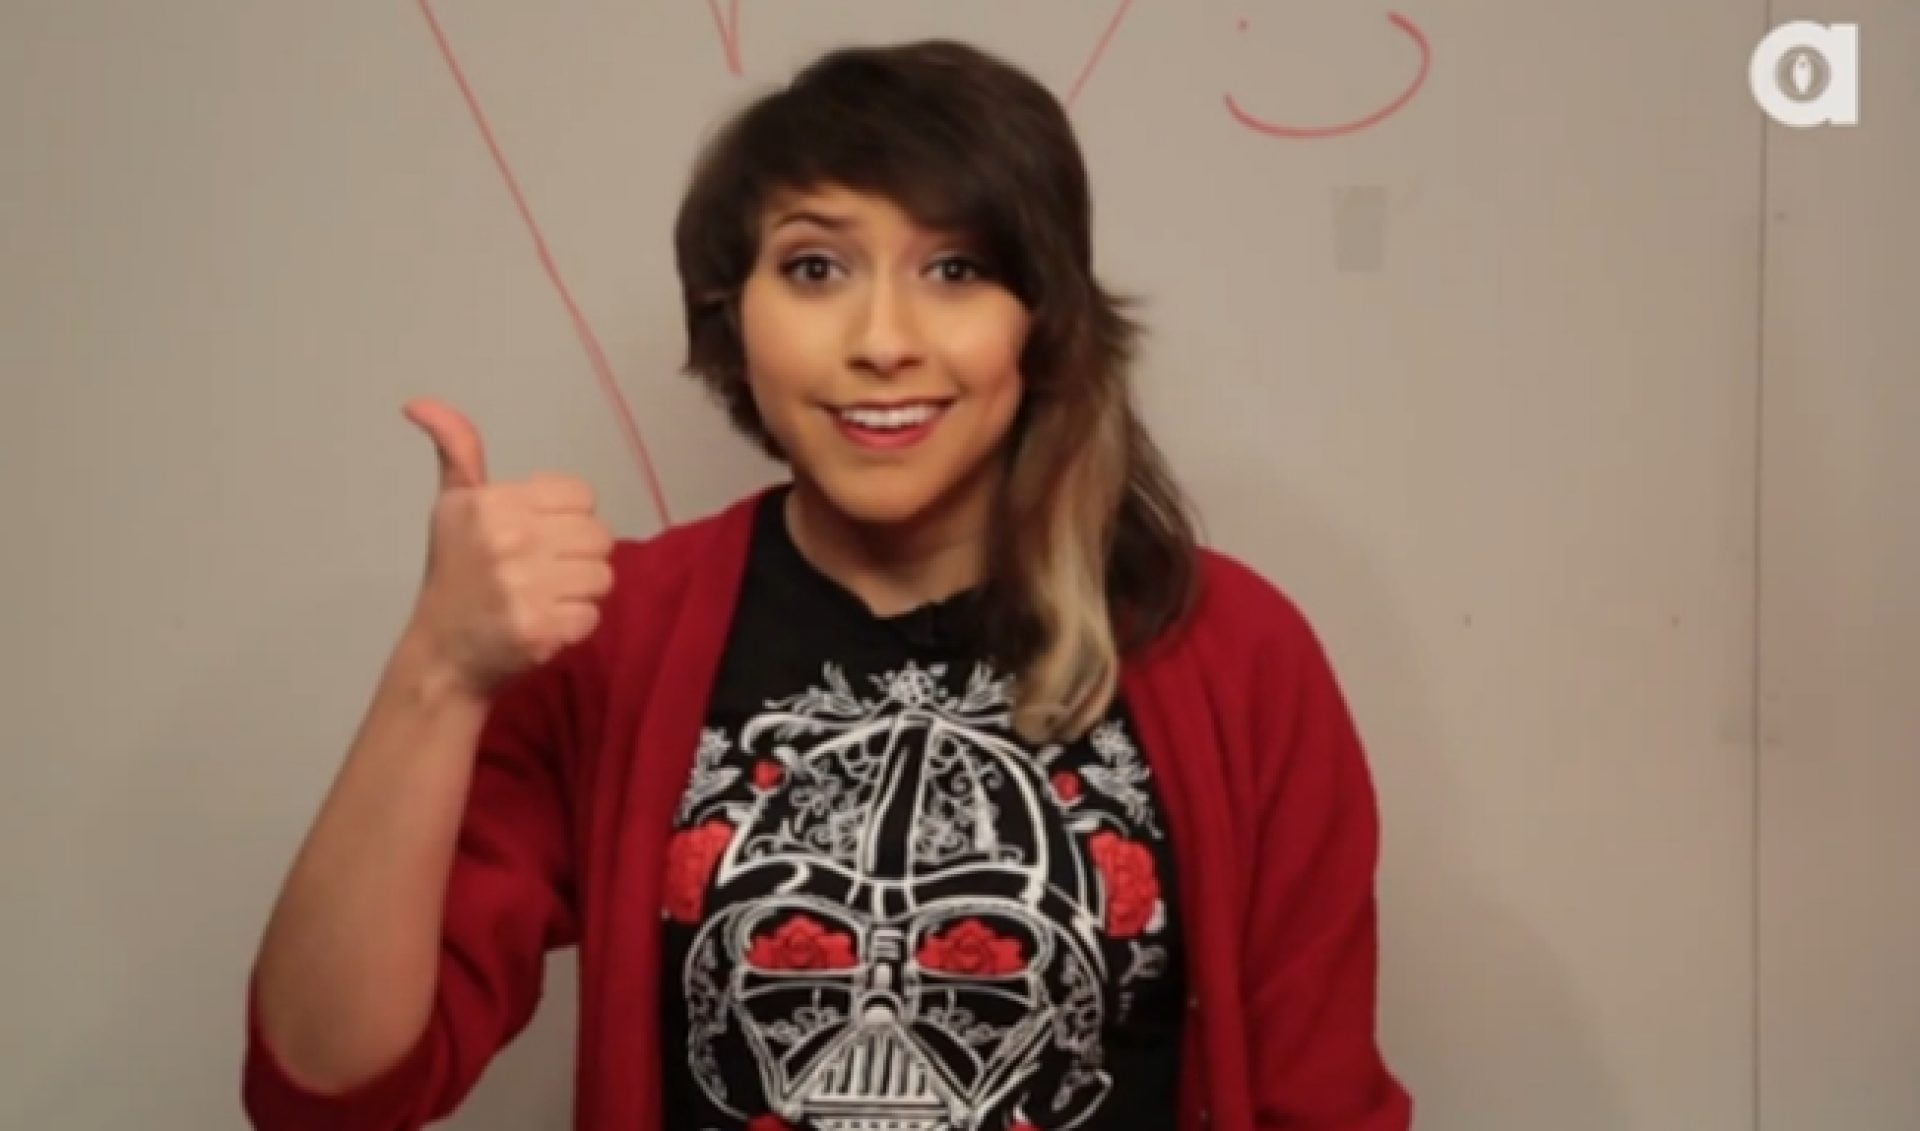 Catie Wayne AKA Boxxy Gets Really Excited About Maggots In New Series